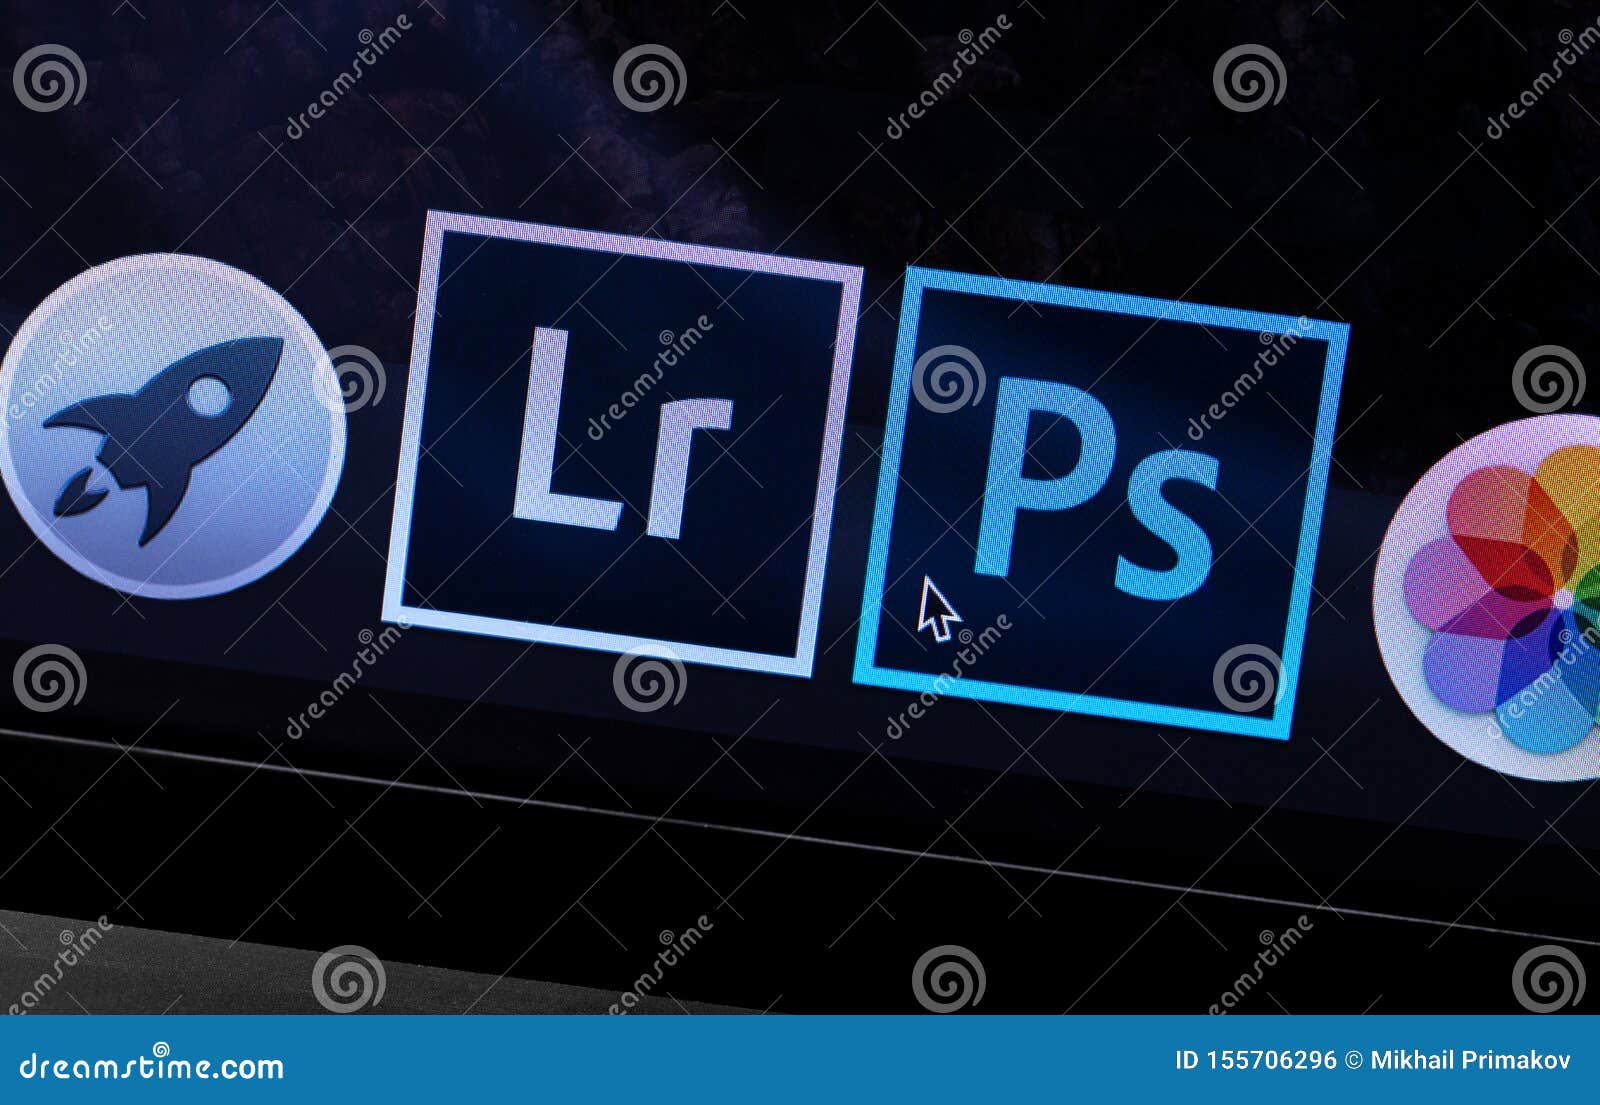 Apple Macbook With Adobe Photoshop And Lightroom Icons App